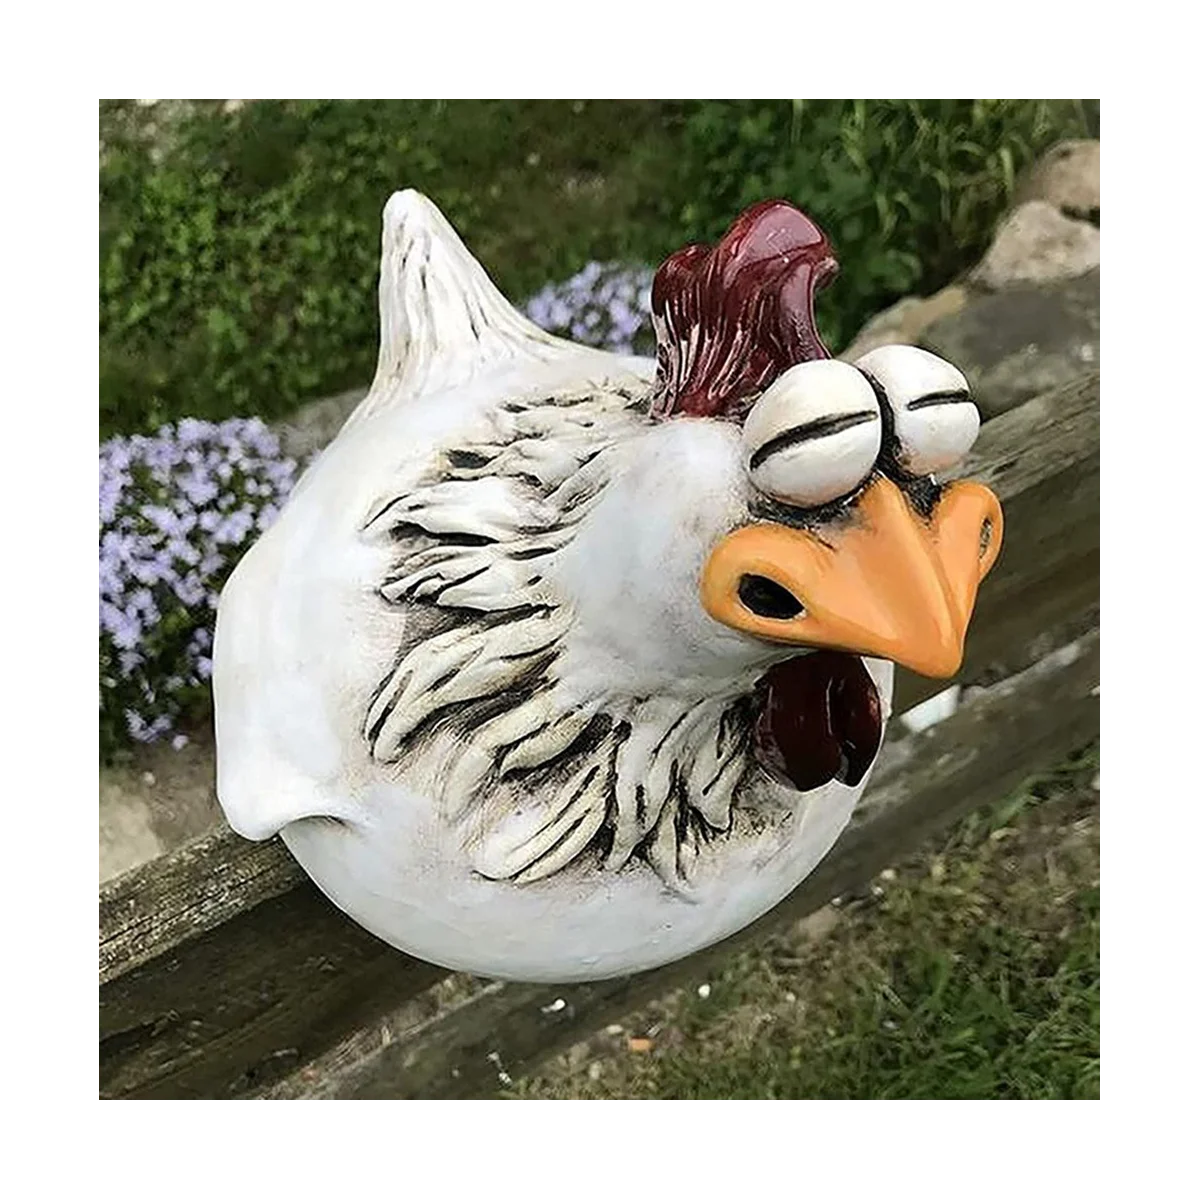 

Chicken Sitting on Fence Decor Garden Statues for Fences Rooster Statues Wall Art Yard Art Sculptures Farm Patio